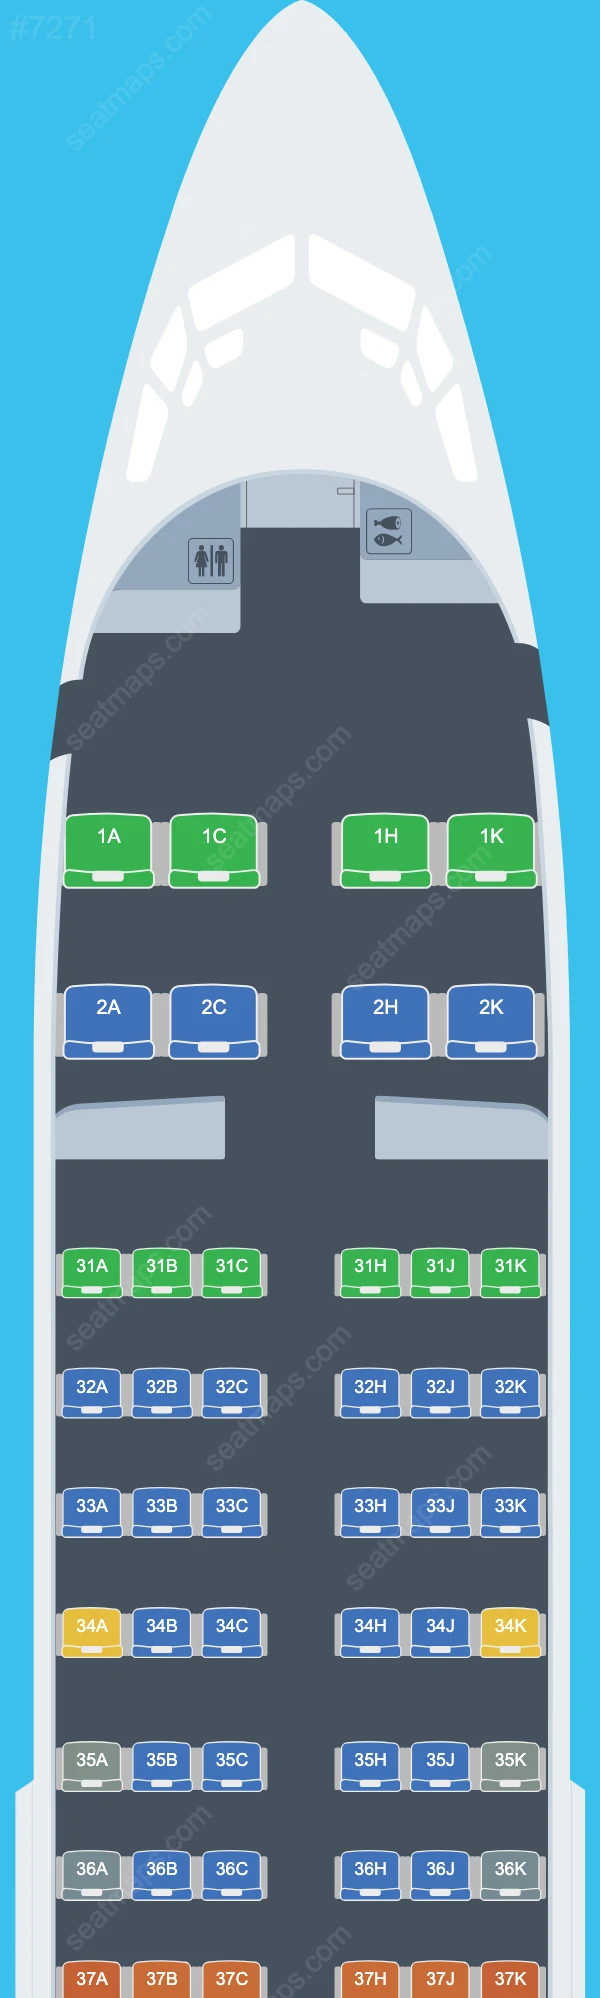 China Southern Boeing 737 Seat Maps 737-300 V.1